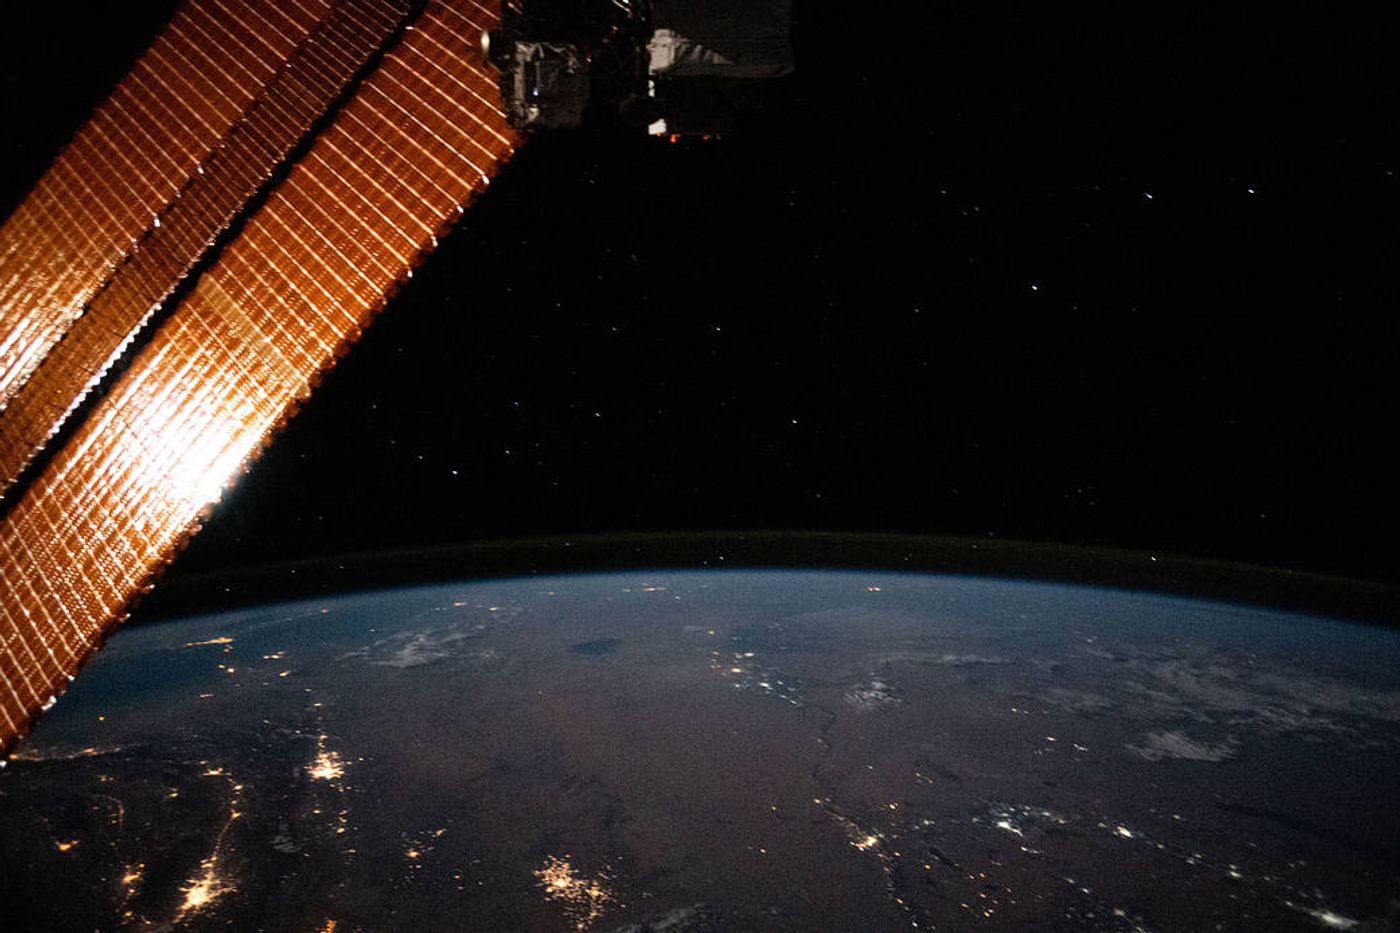 An image taken from the ISS / Credit: NASA